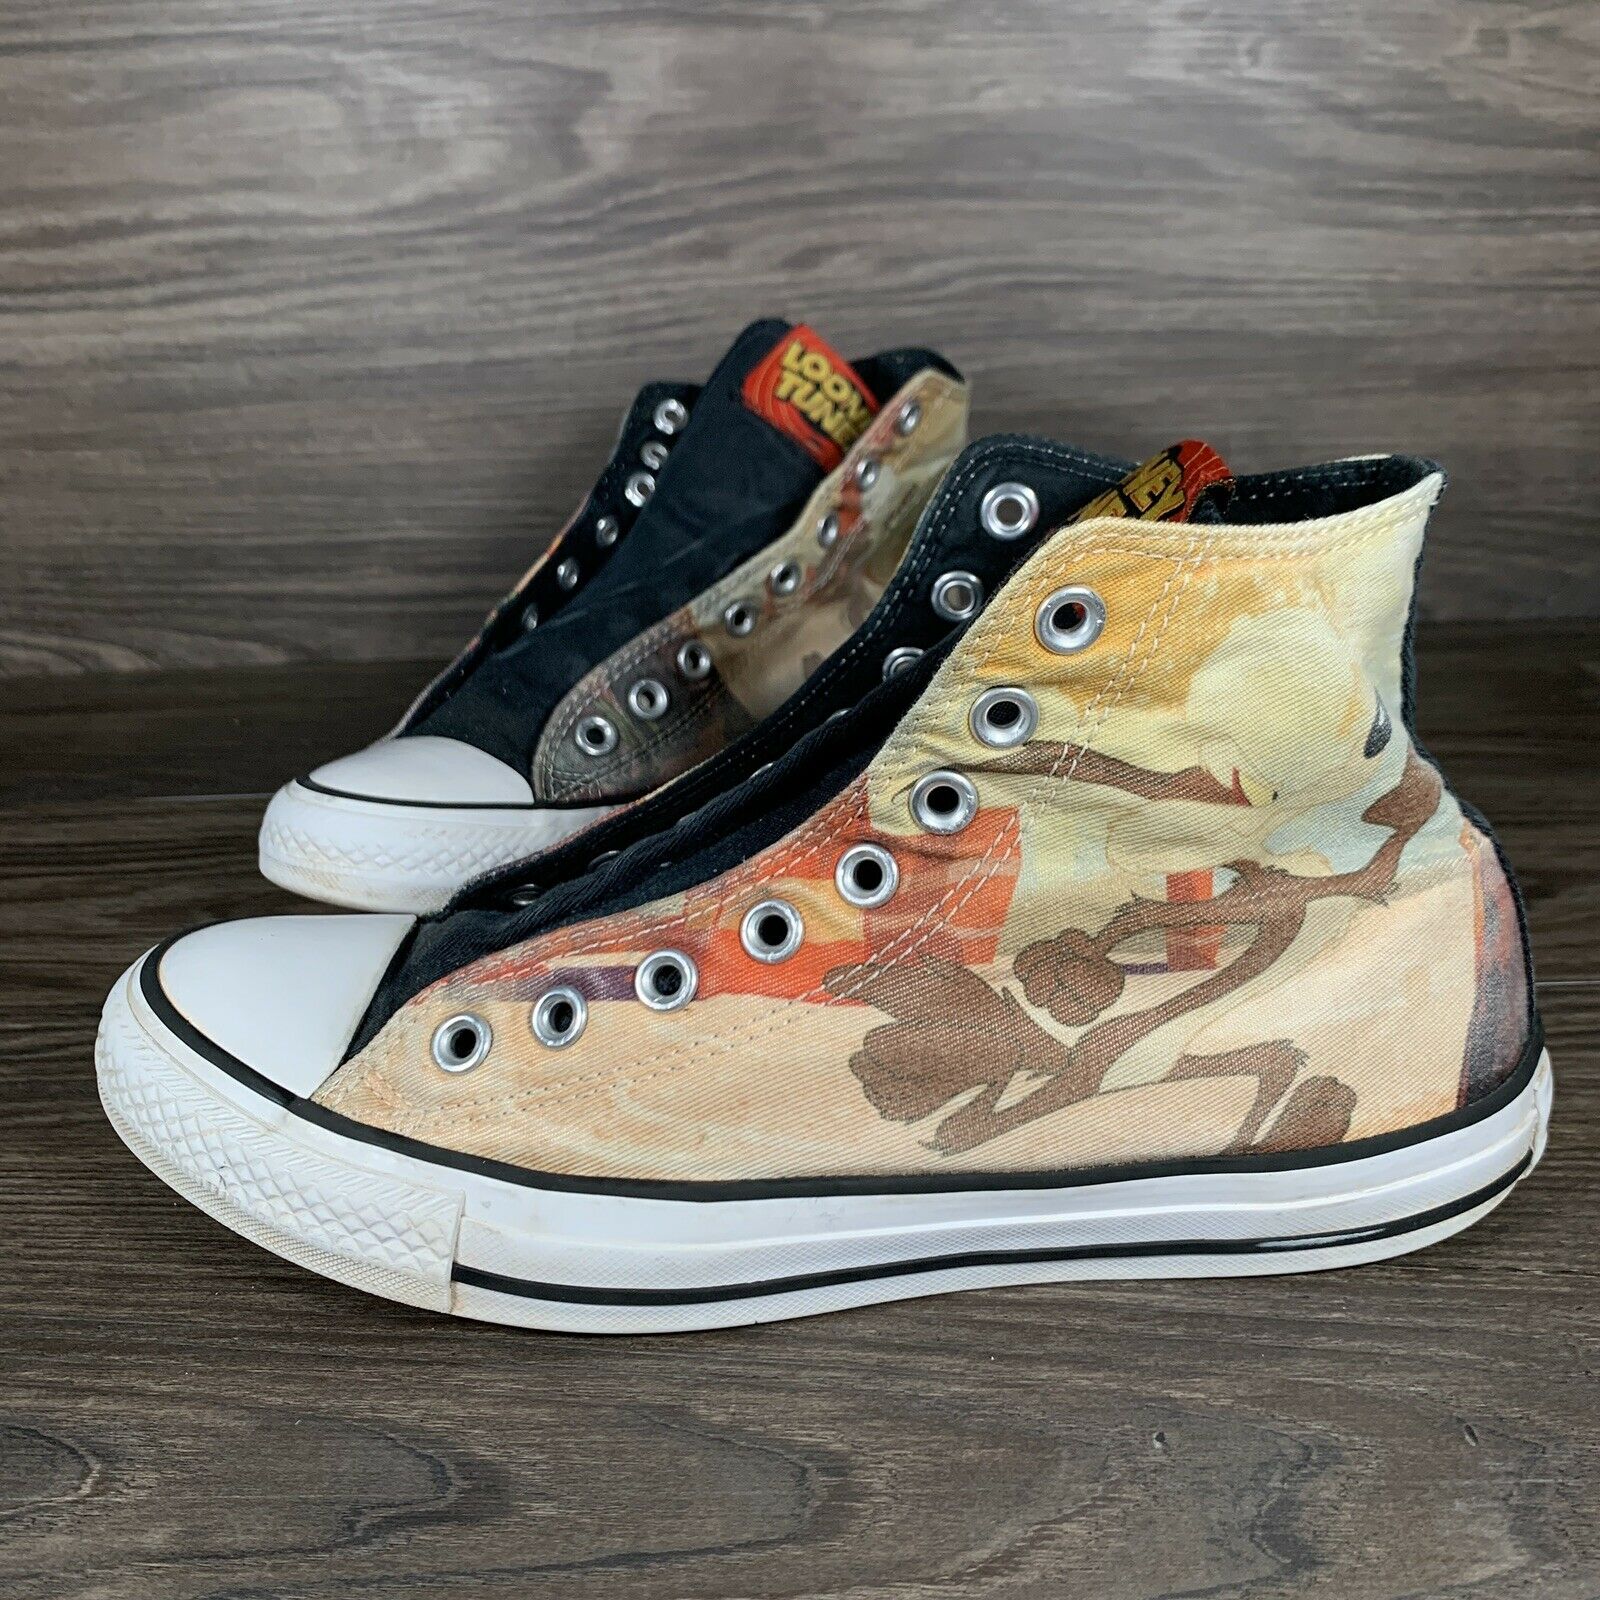 Converse Looney Tunes Shoes Road Runner Wile E Coyote Men 7 Women 9 No Laces